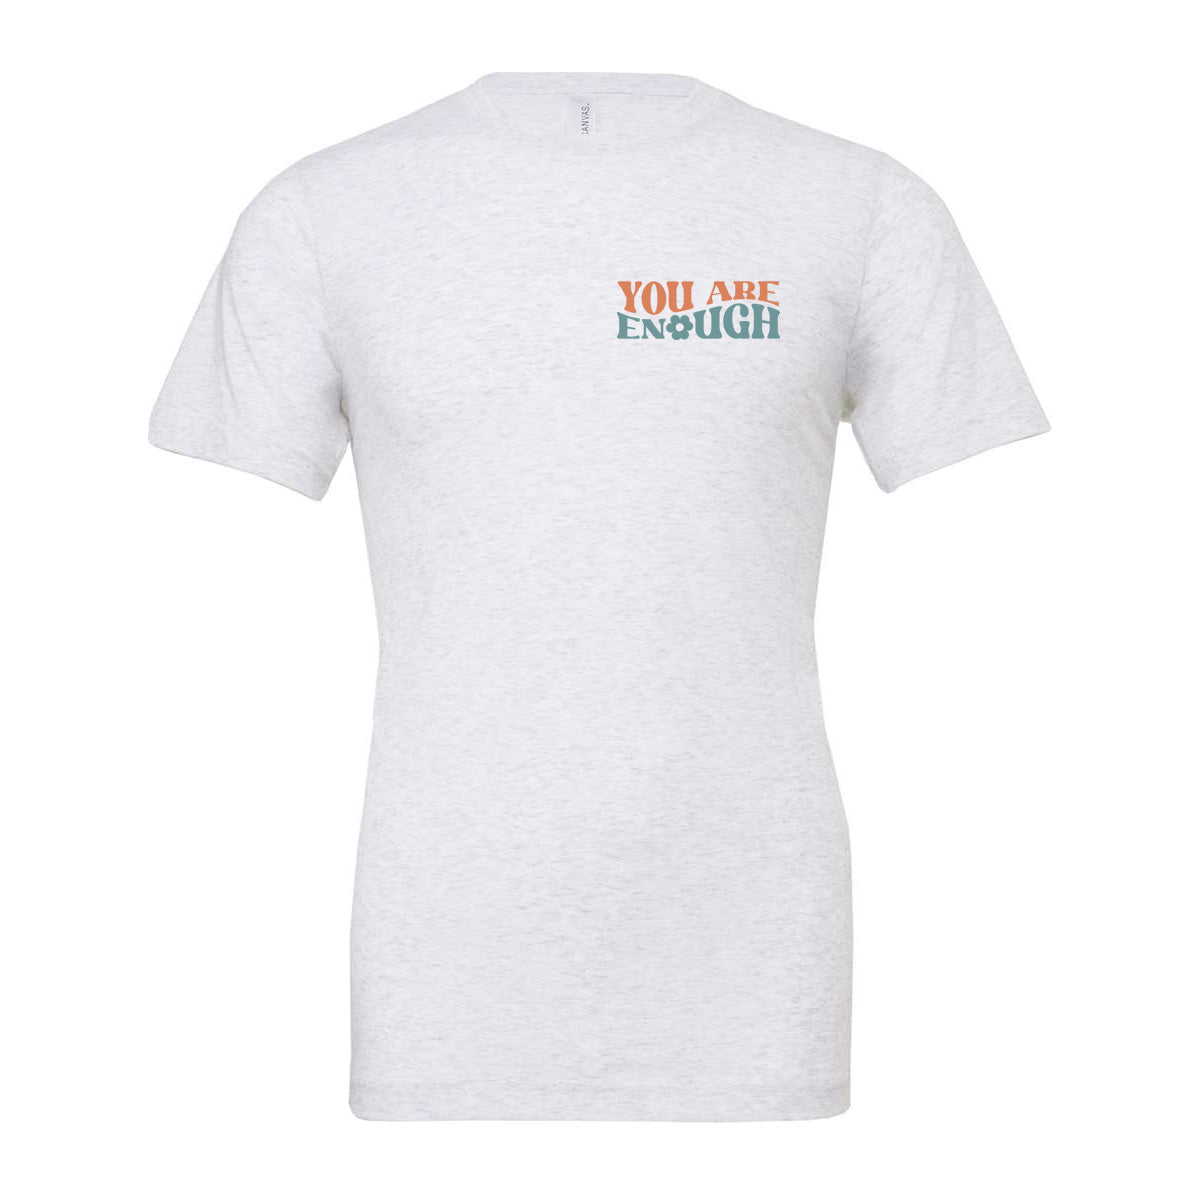 You Are Enough - Ash Tee - Southern Grace Creations